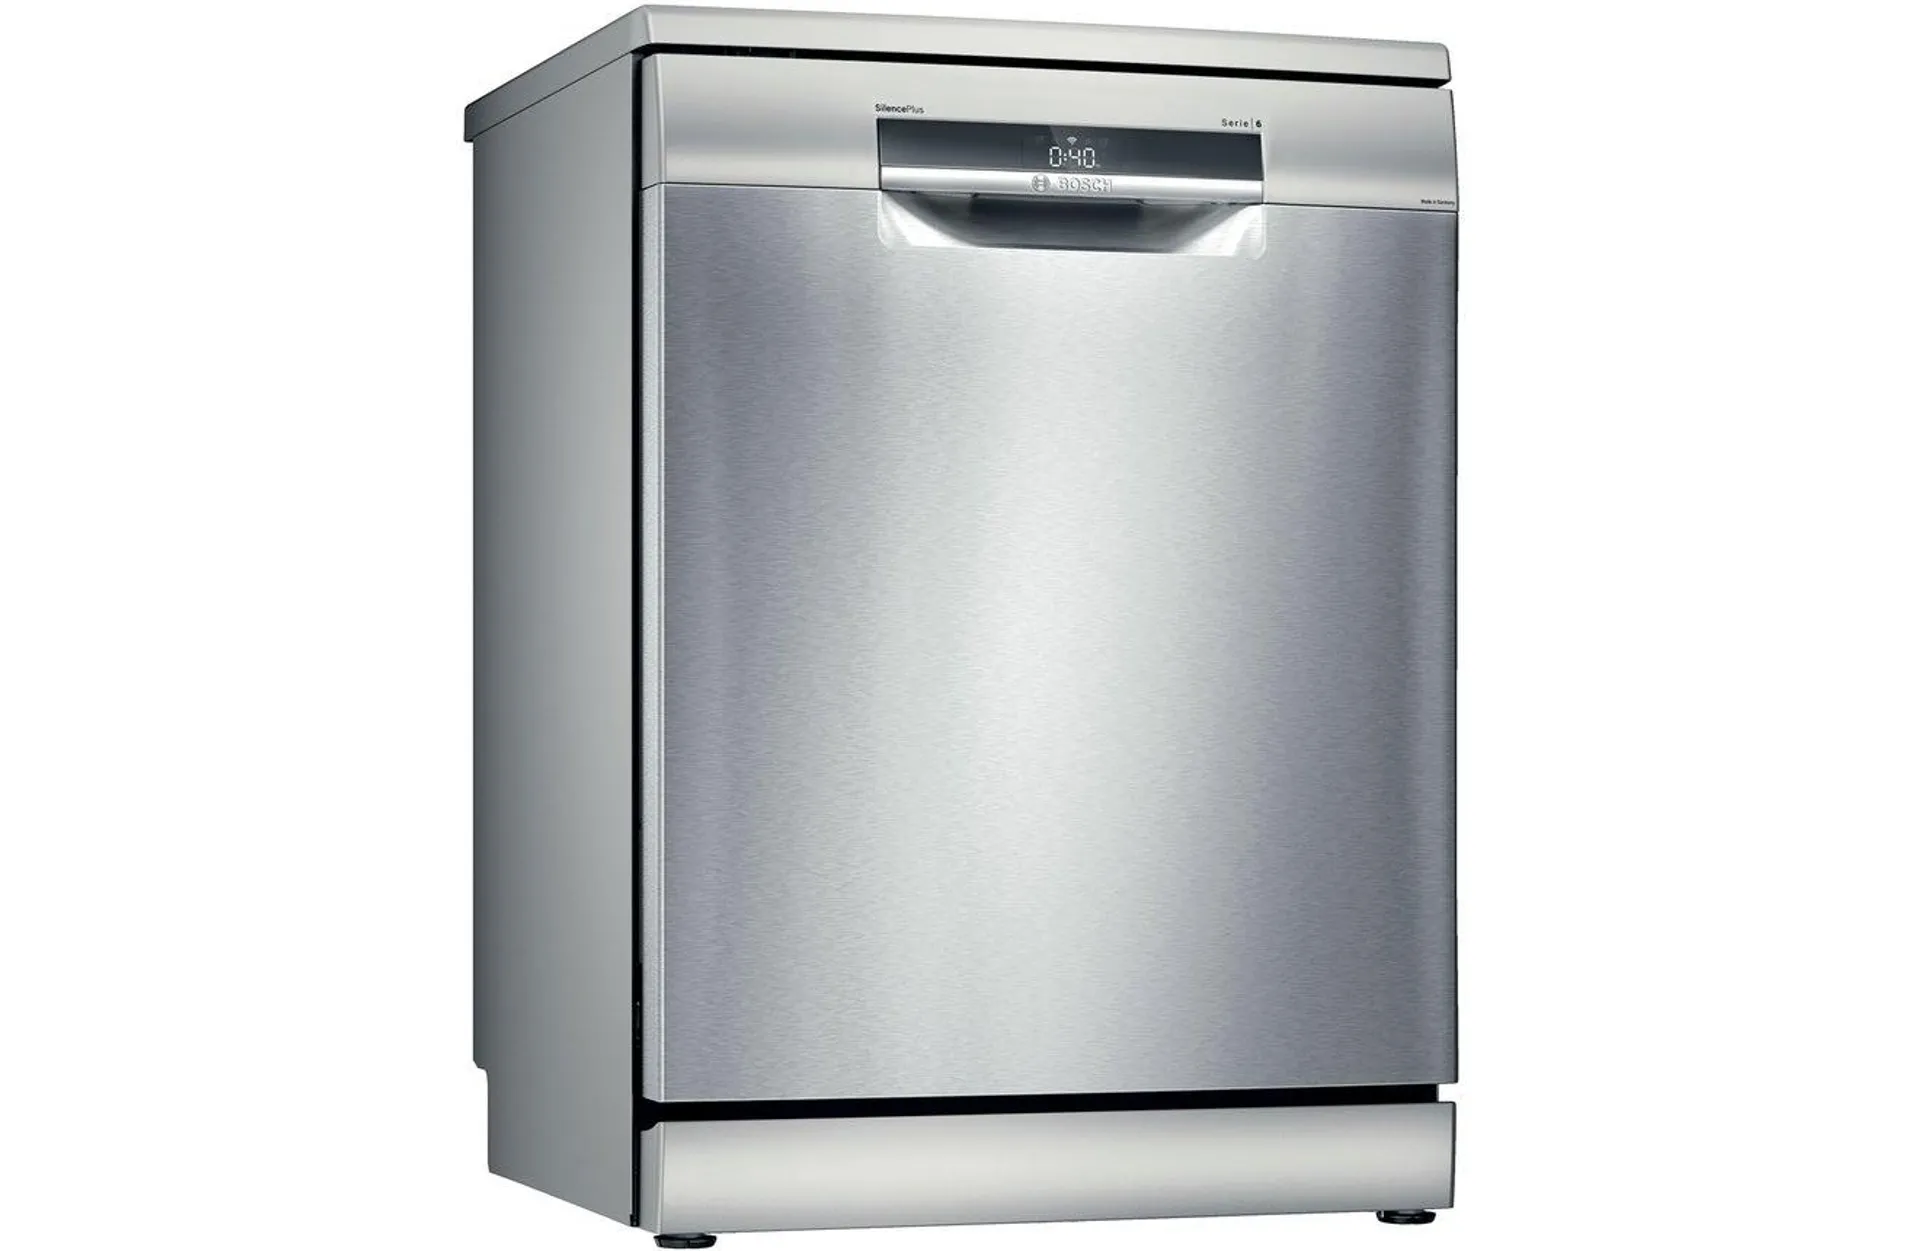 Bosch Series 6 | 14 Place Setting Freestanding Dishwasher - SMS6HAI01A